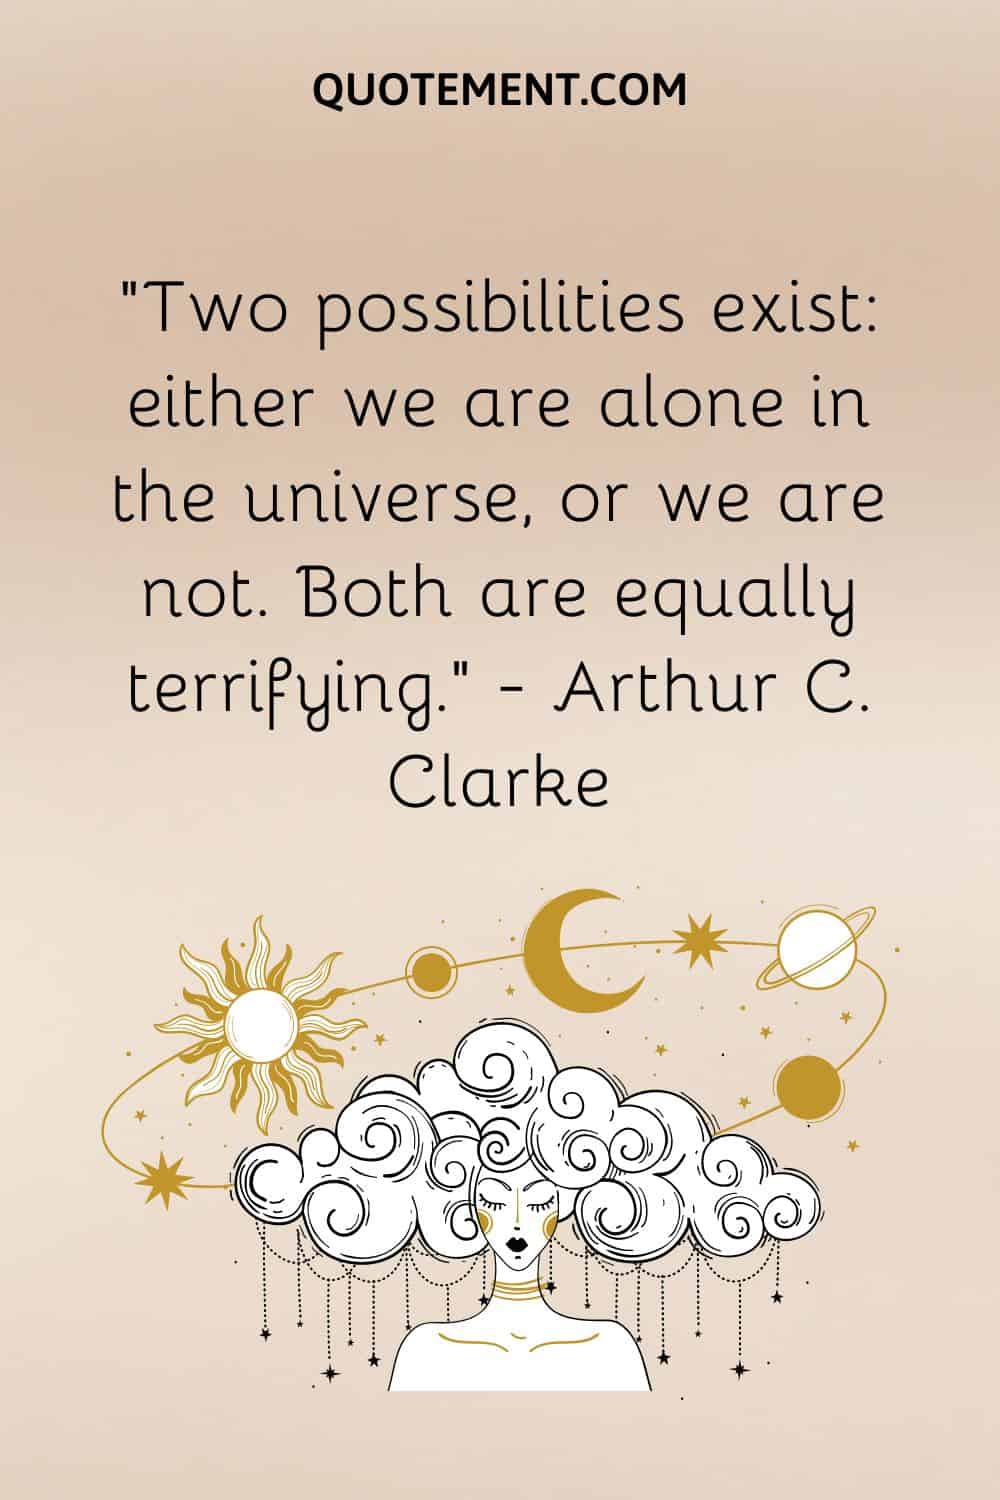 Two possibilities exist either we are alone in the universe, or we are not